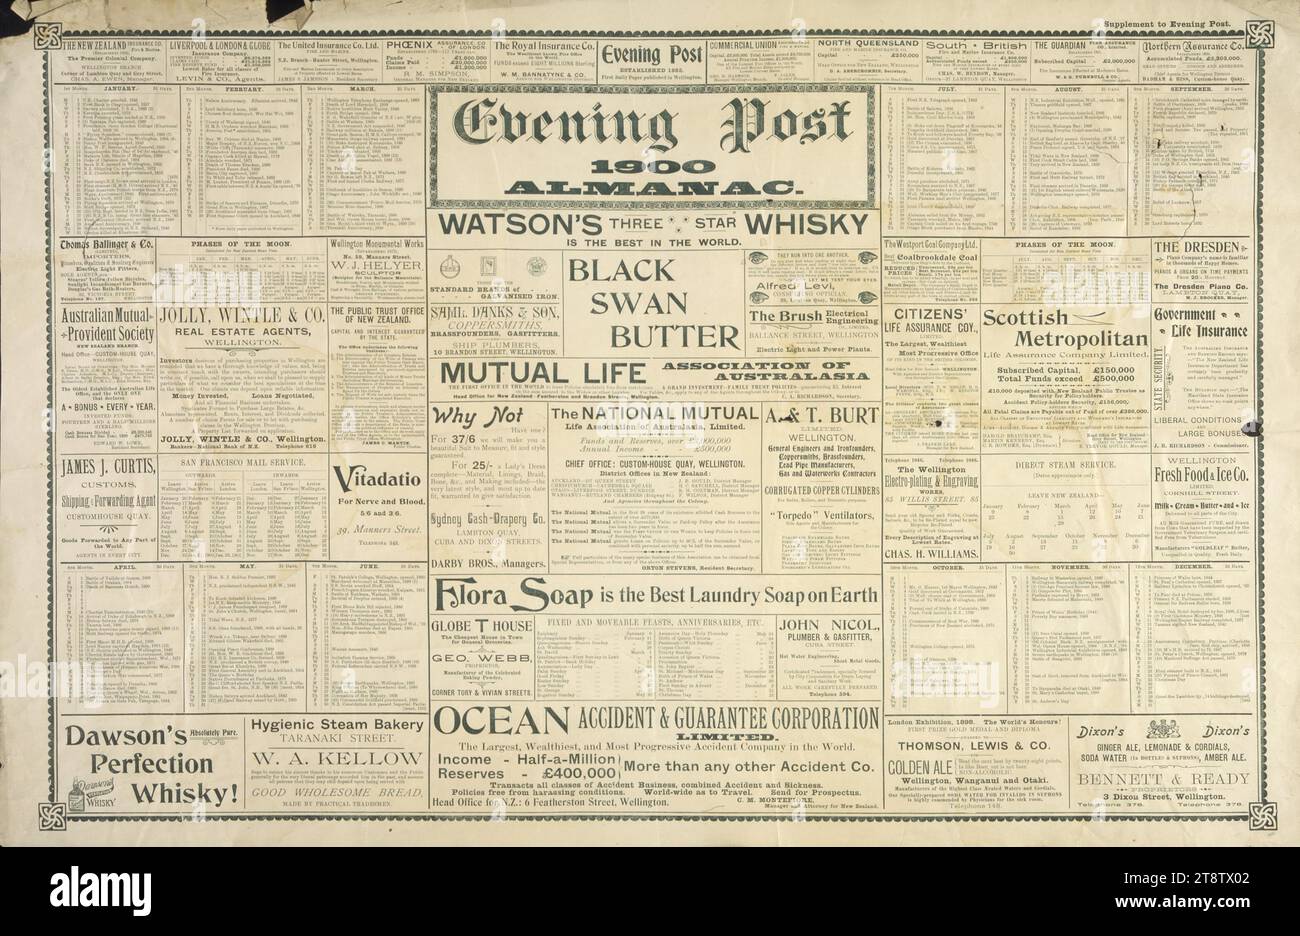 Evening Post: Evening Post 1900 almanac. 1900, Arrangement of text, giving historic events to be remembered on each day of the month. The text of the sheet contains columns and boxes of advertisements for insurance companies, estate agents, liquor retailers, and other merchants Stock Photo